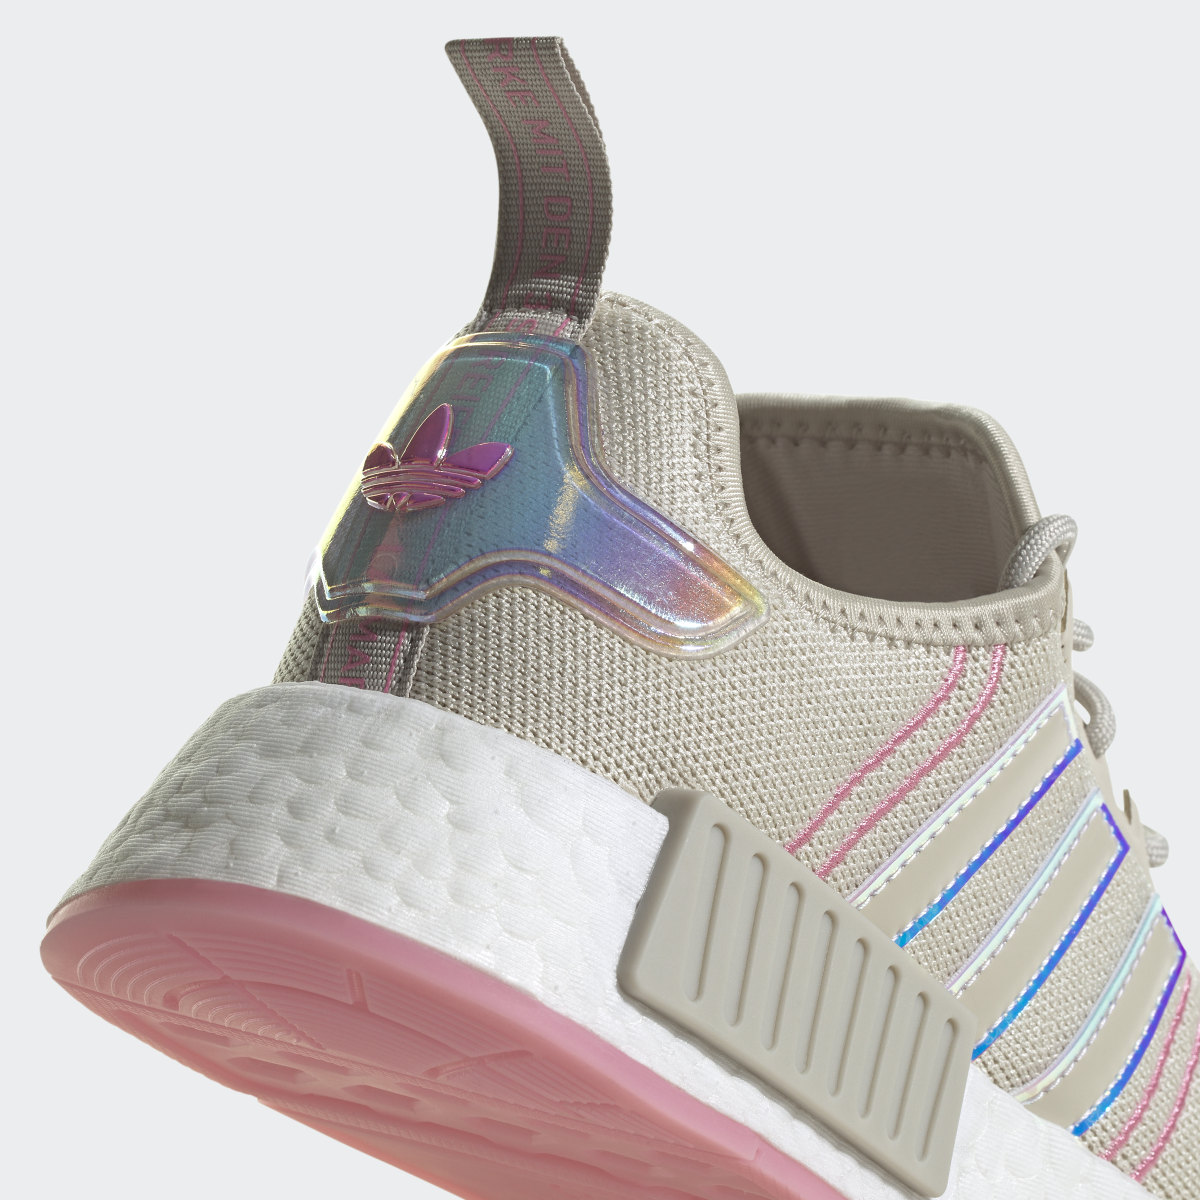 Adidas NMD_R1 Shoes. 10